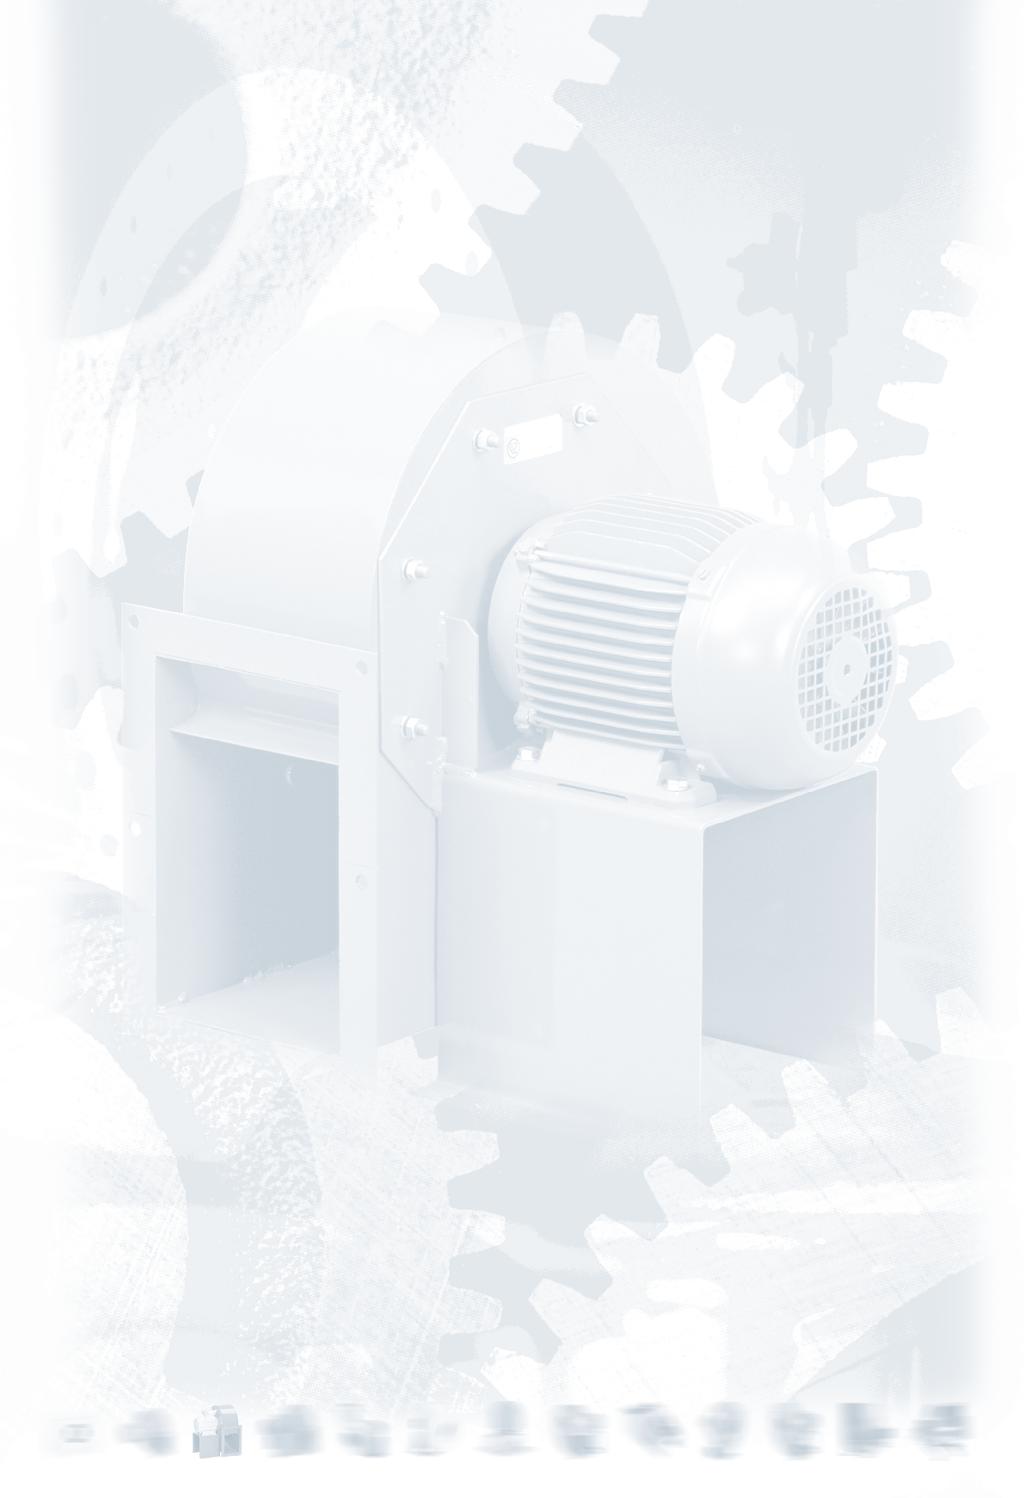 CNTRIFUGAL SINGL INLT FANS CT Series, F400 120 Rated Fans Officially approved to N12101-3 standard (certificate number 0370-CPD-0348) Range of single inlet direct drive centrifugal